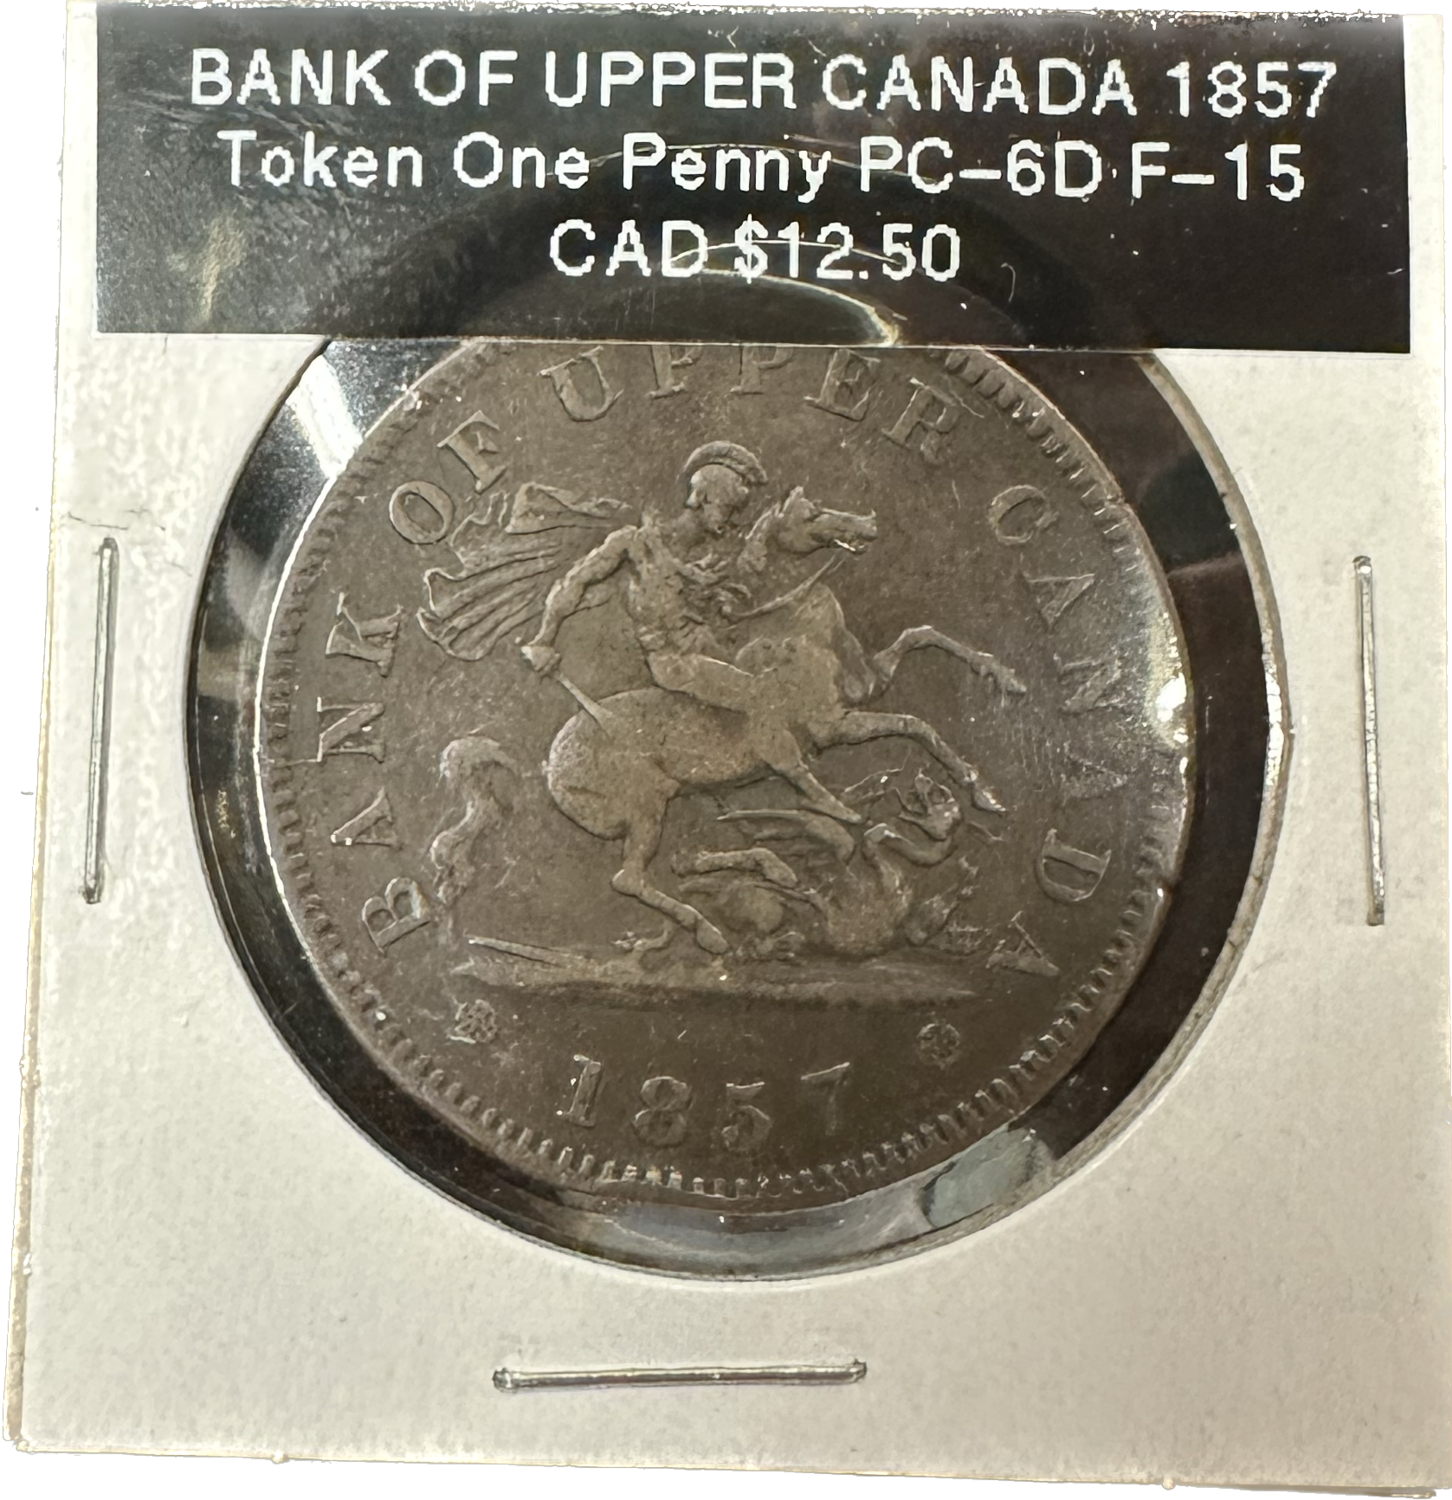 Bank of Upper Canada One Penny 1857 PC-6D F-15 Token